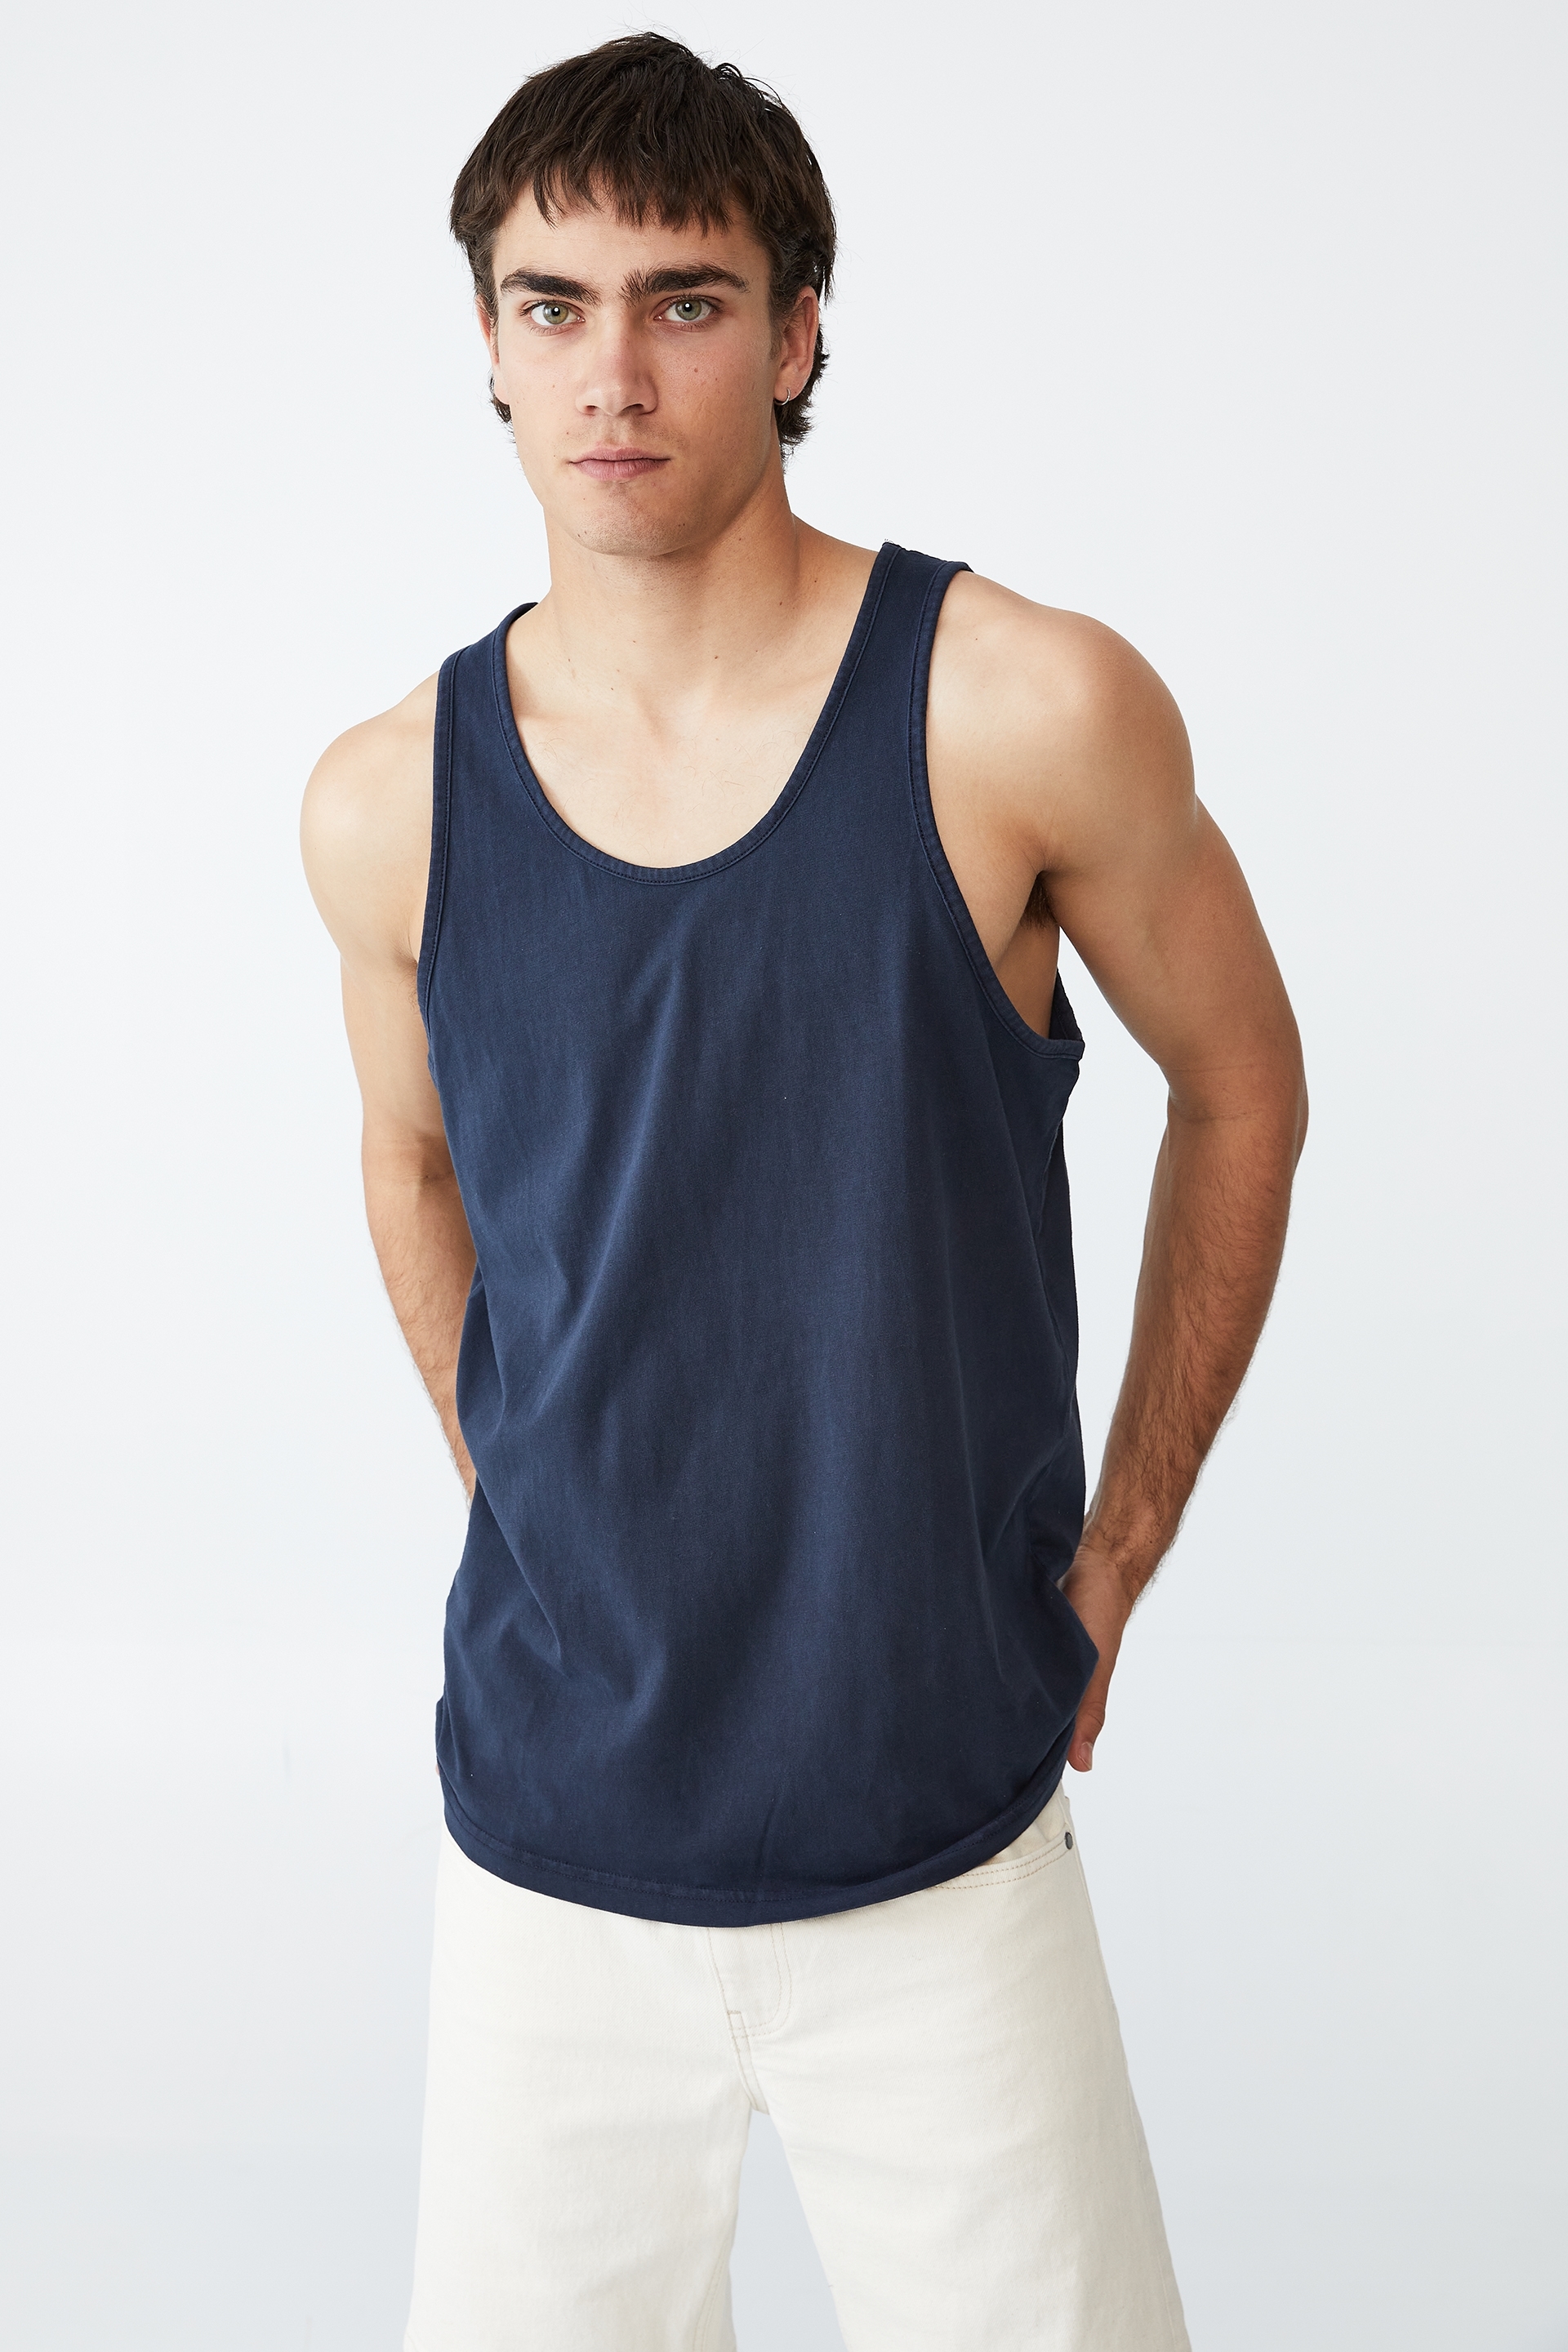 Cotton On Men - Vacation Tank - True navy washed